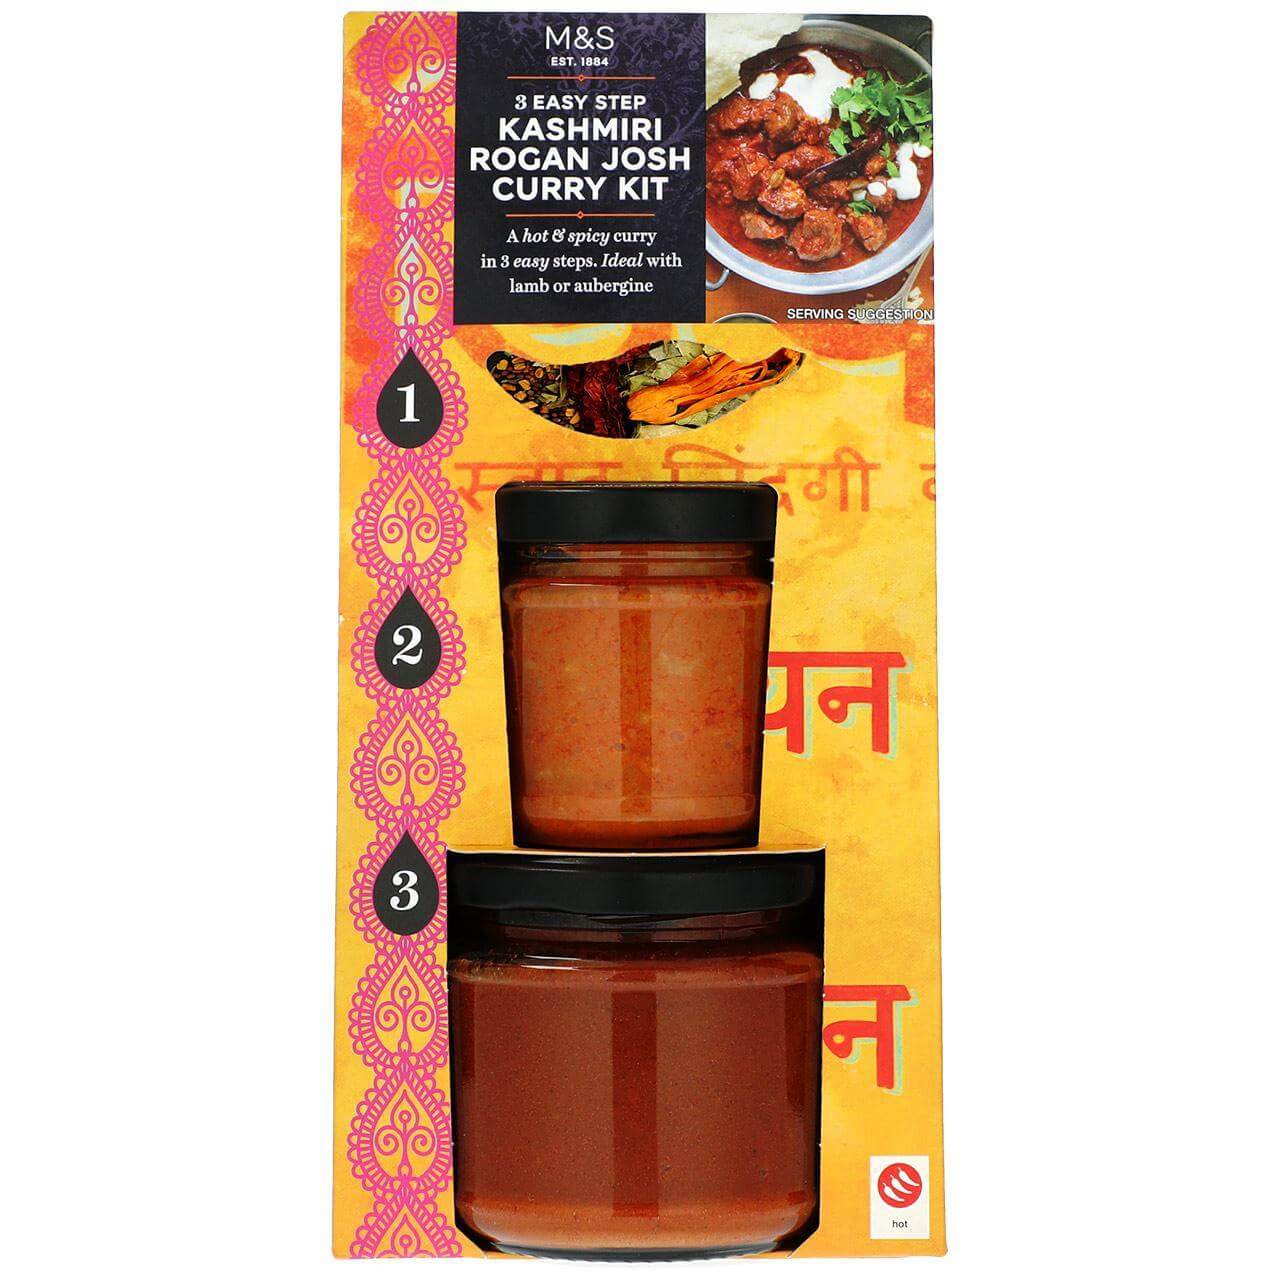 Image of M&S Kashmiri Rogan Josh Curry Kit by Marks & Spencer Food, designed, produced or made in the UK. Buying this product supports a UK business, jobs and the local community.